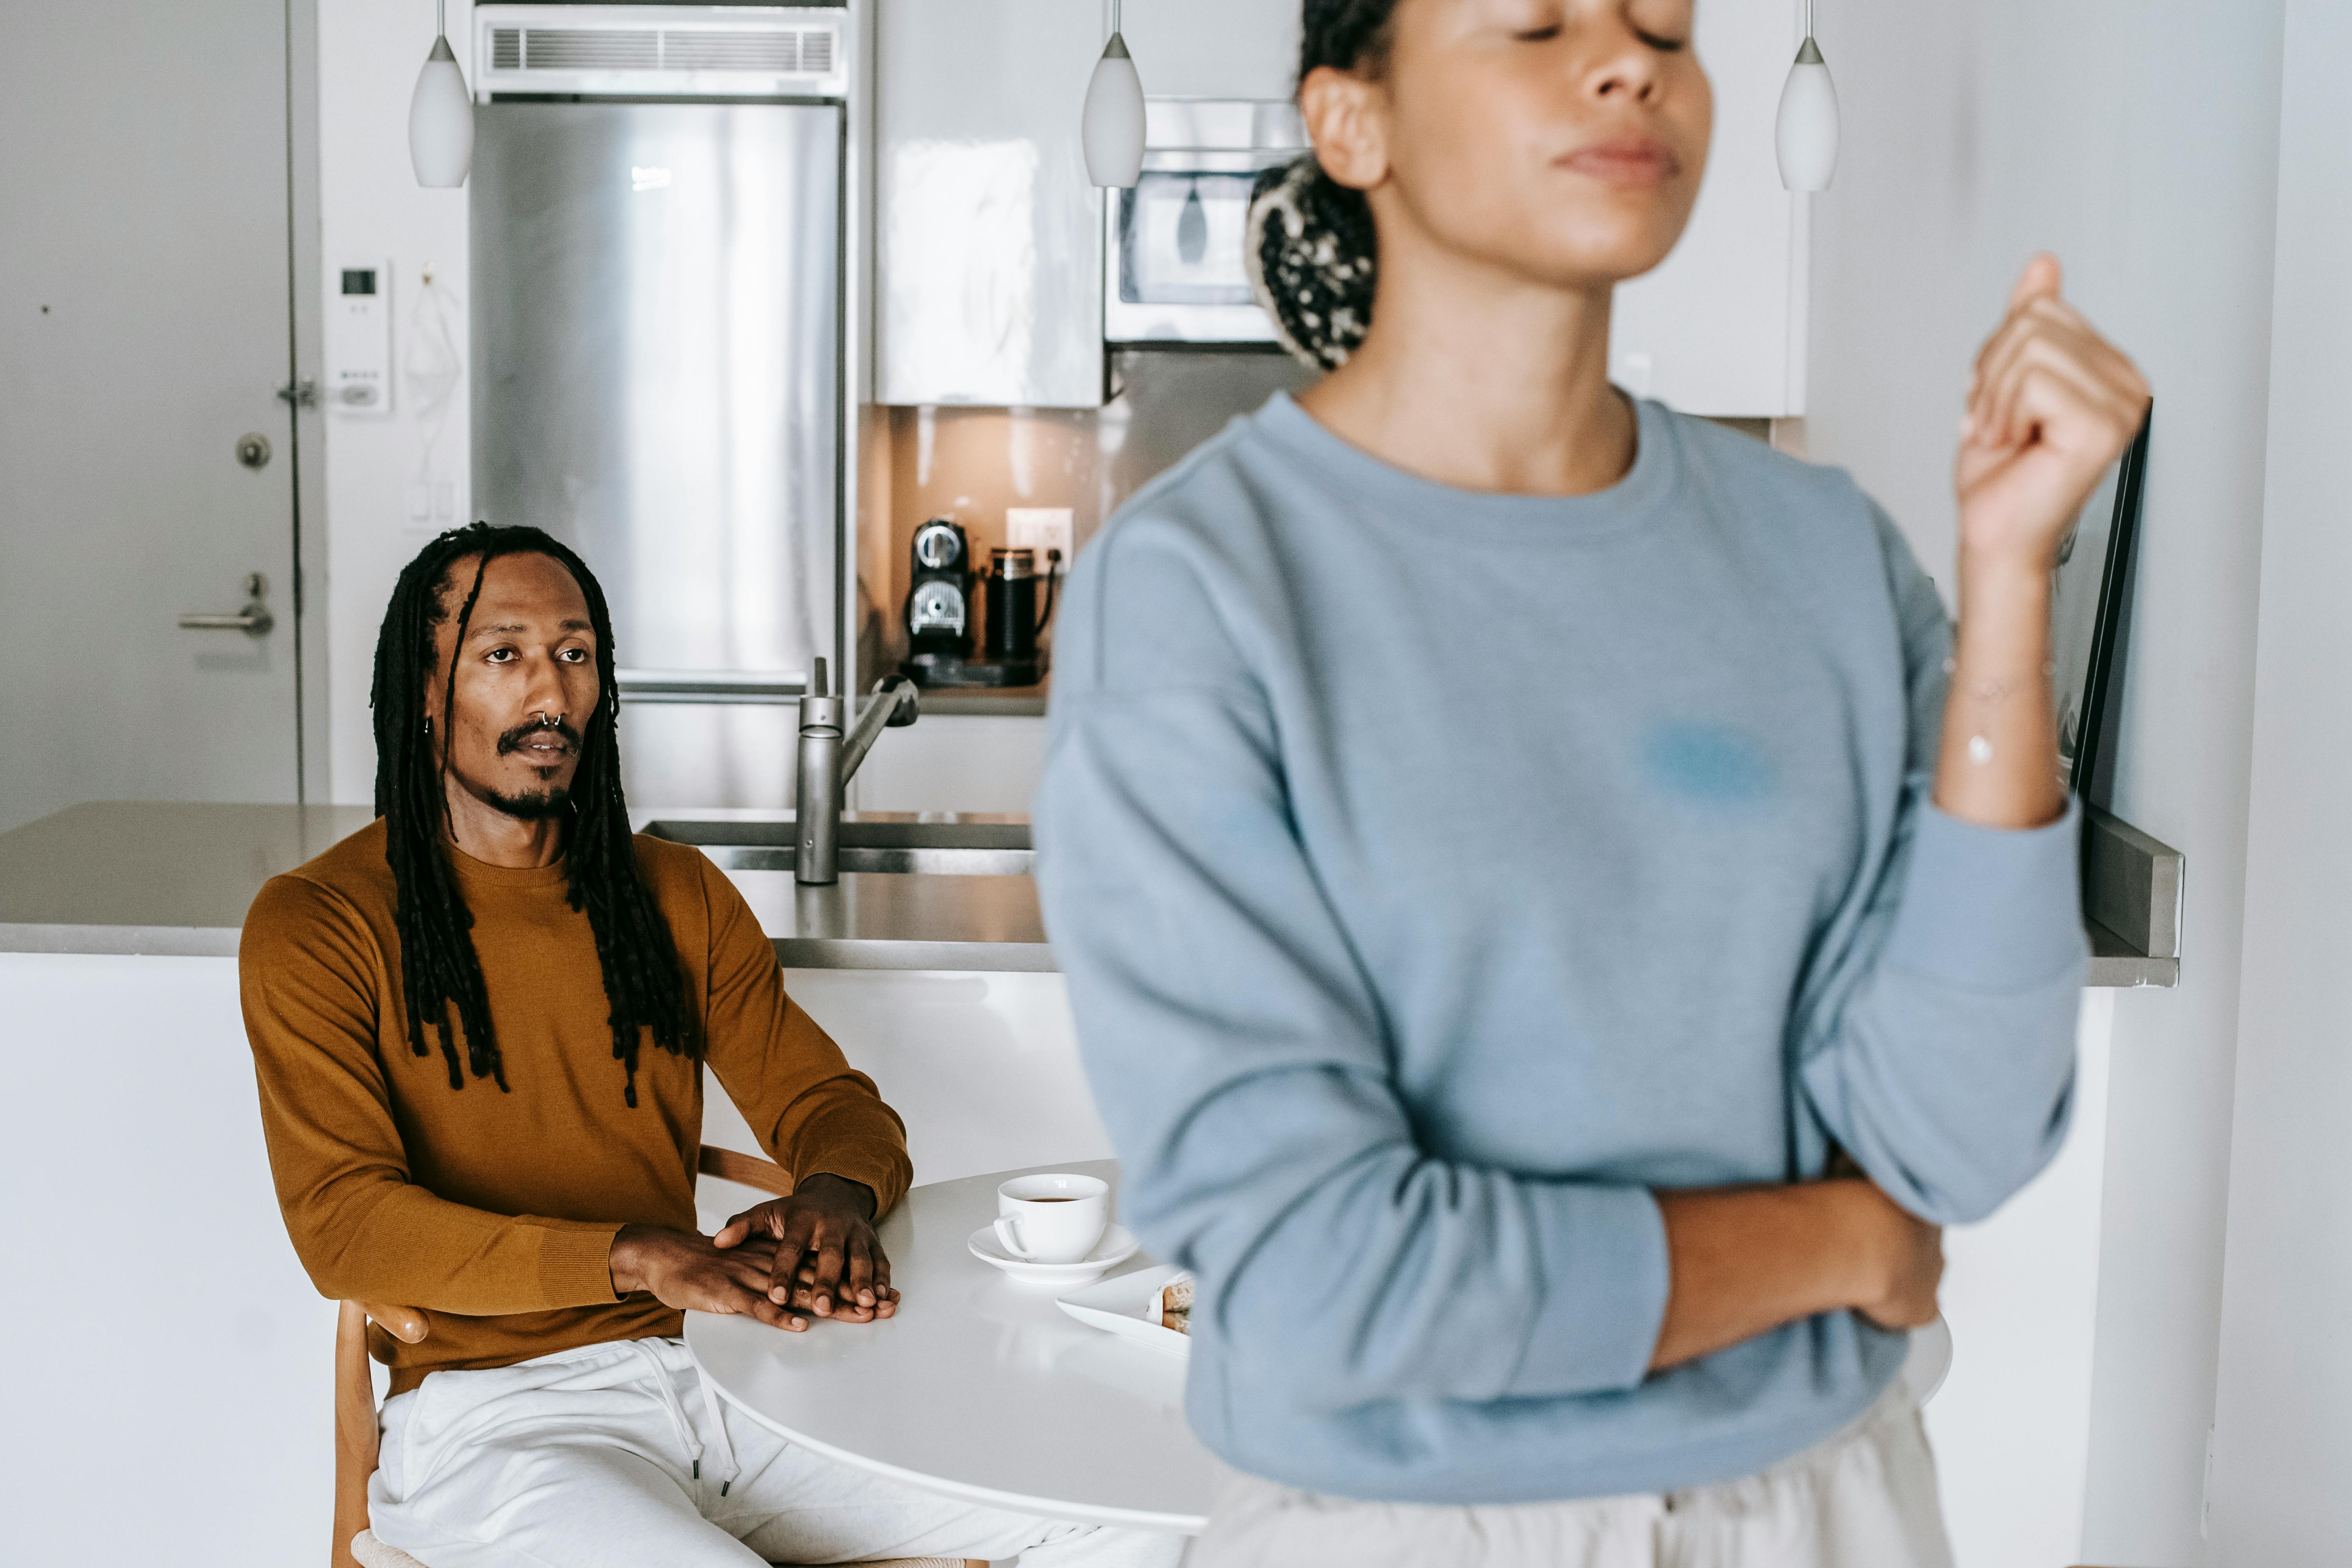 A couple arguing at home | Source: Pexels